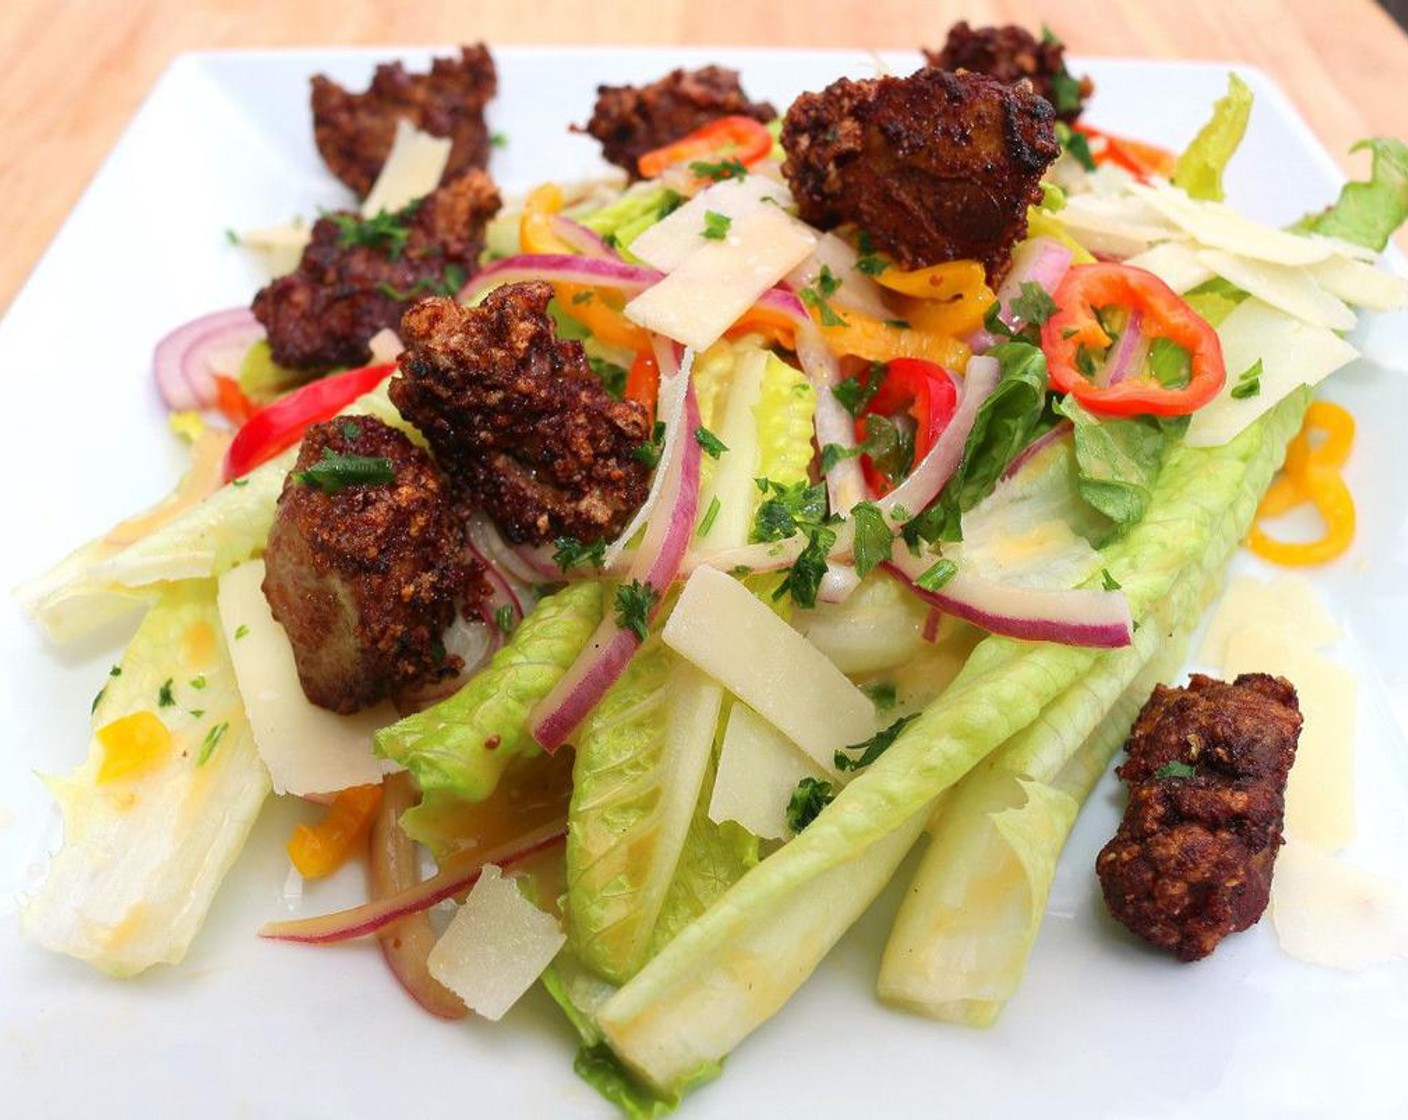 Salad of Cracked Pepper-Dusted Chicken Liver Nuggets